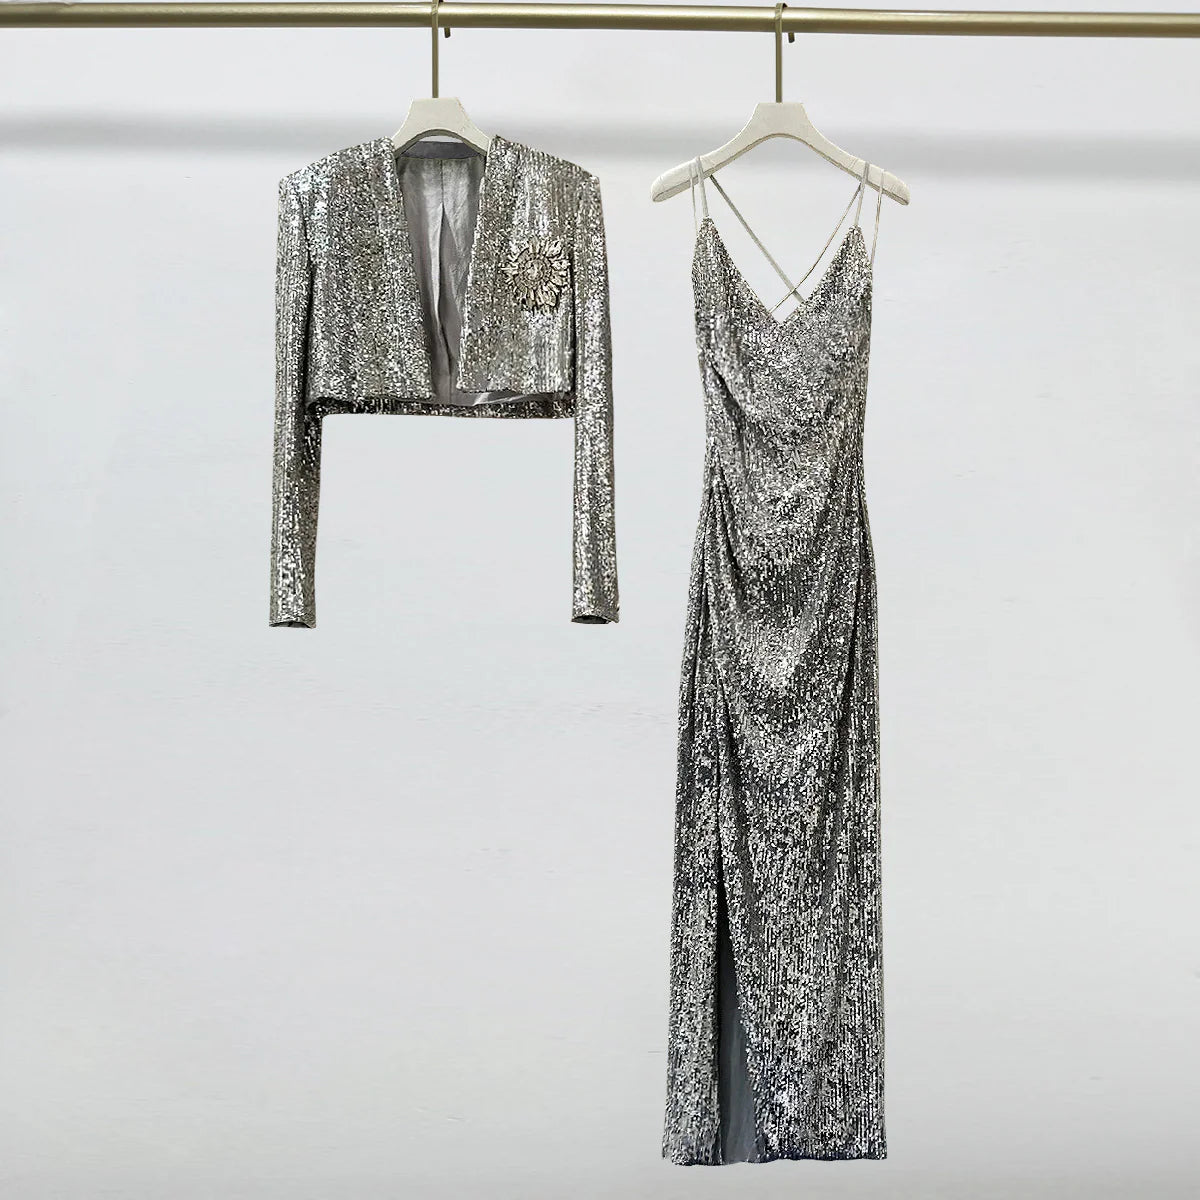 NEXT DAY DELIVERY LEYLAH Sequins Dress with Jacket